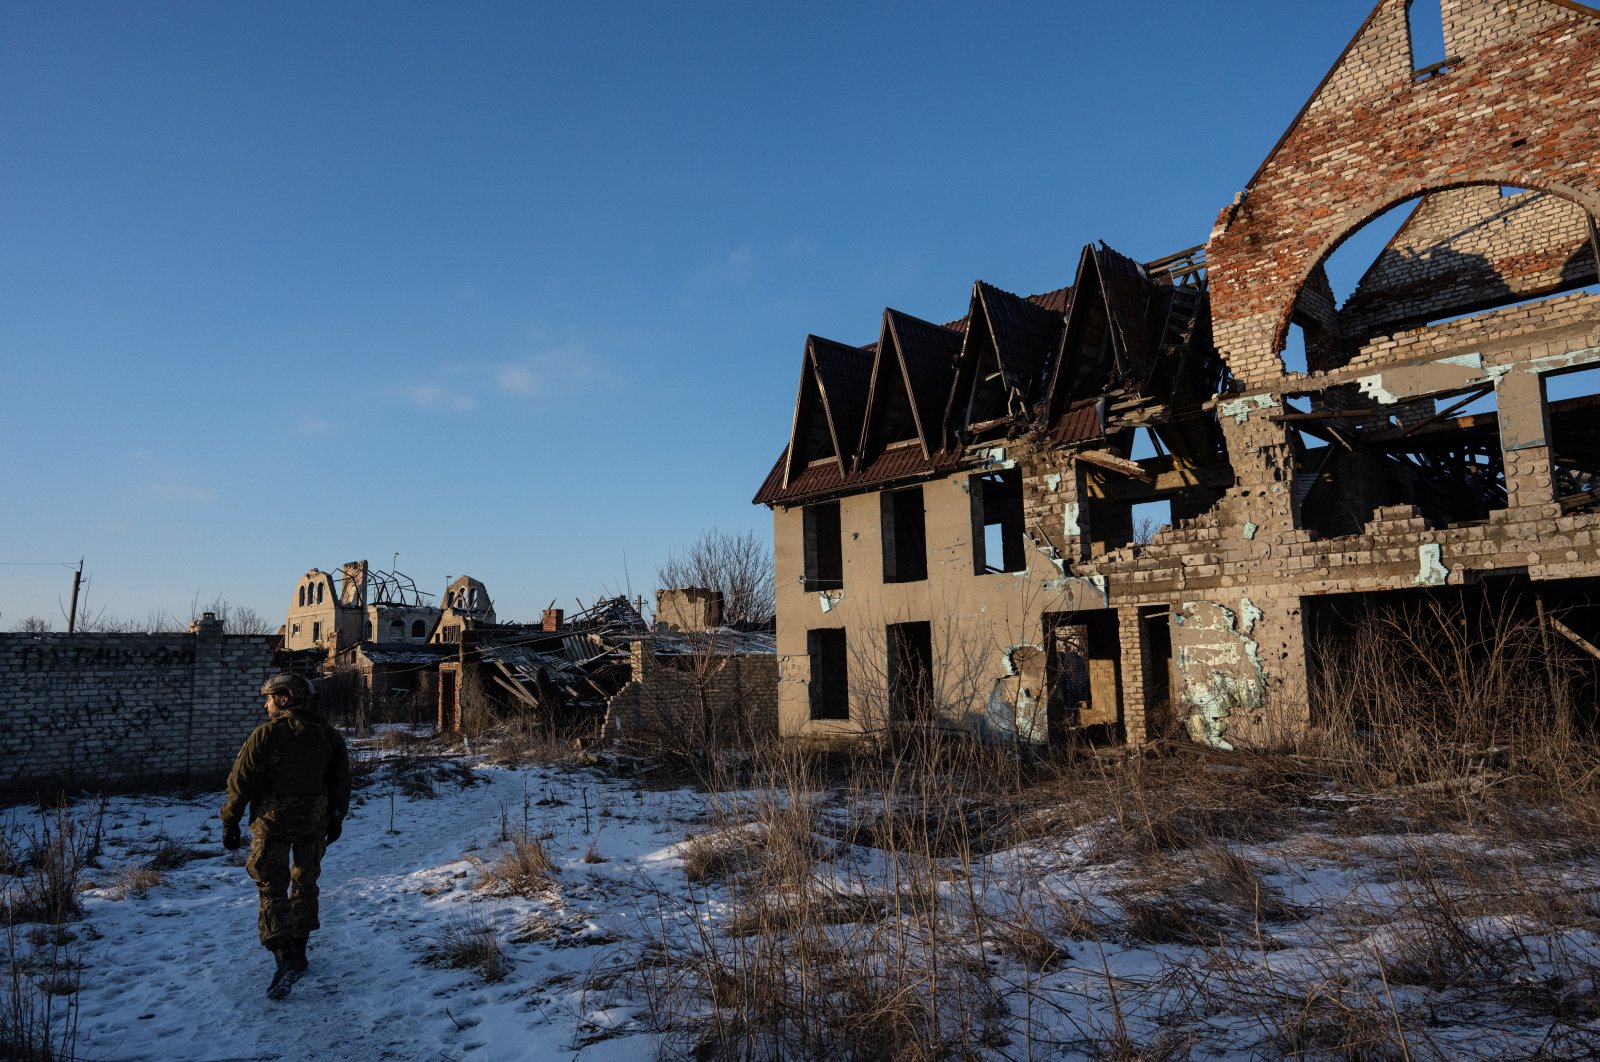 A Ukrainian soldier walks by an abandoned building in the city of Donetsk, Ukraine, Feb. 5, 2022. (AA Photo)